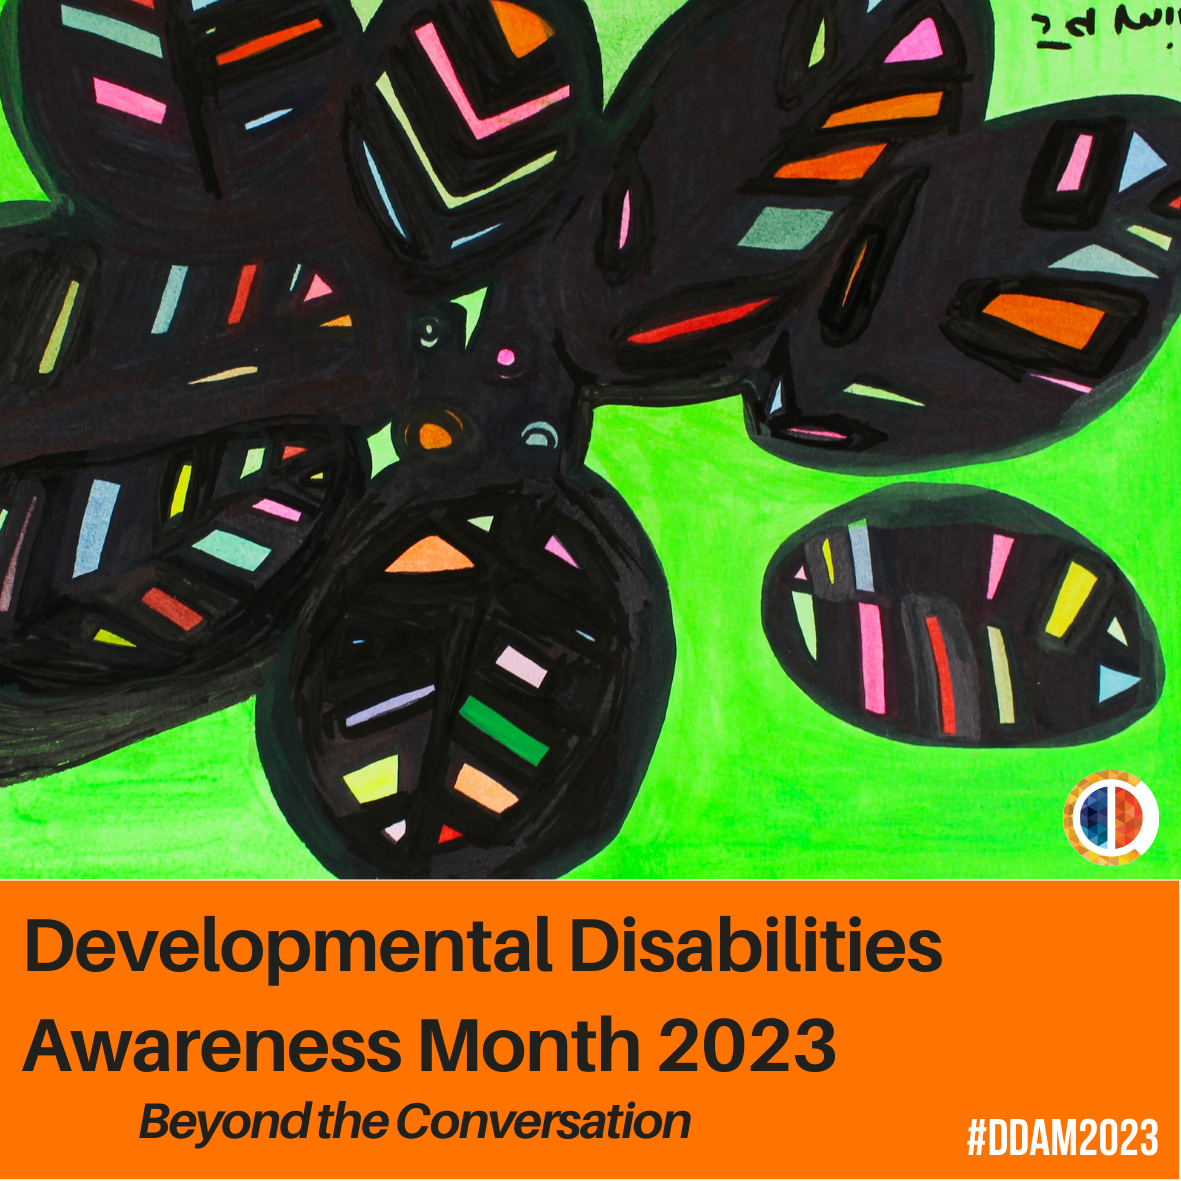 Developmental Disabilities Awareness Month 2023, Beyond the conversation with painting of black outlined colorful leaves on a bright green background.